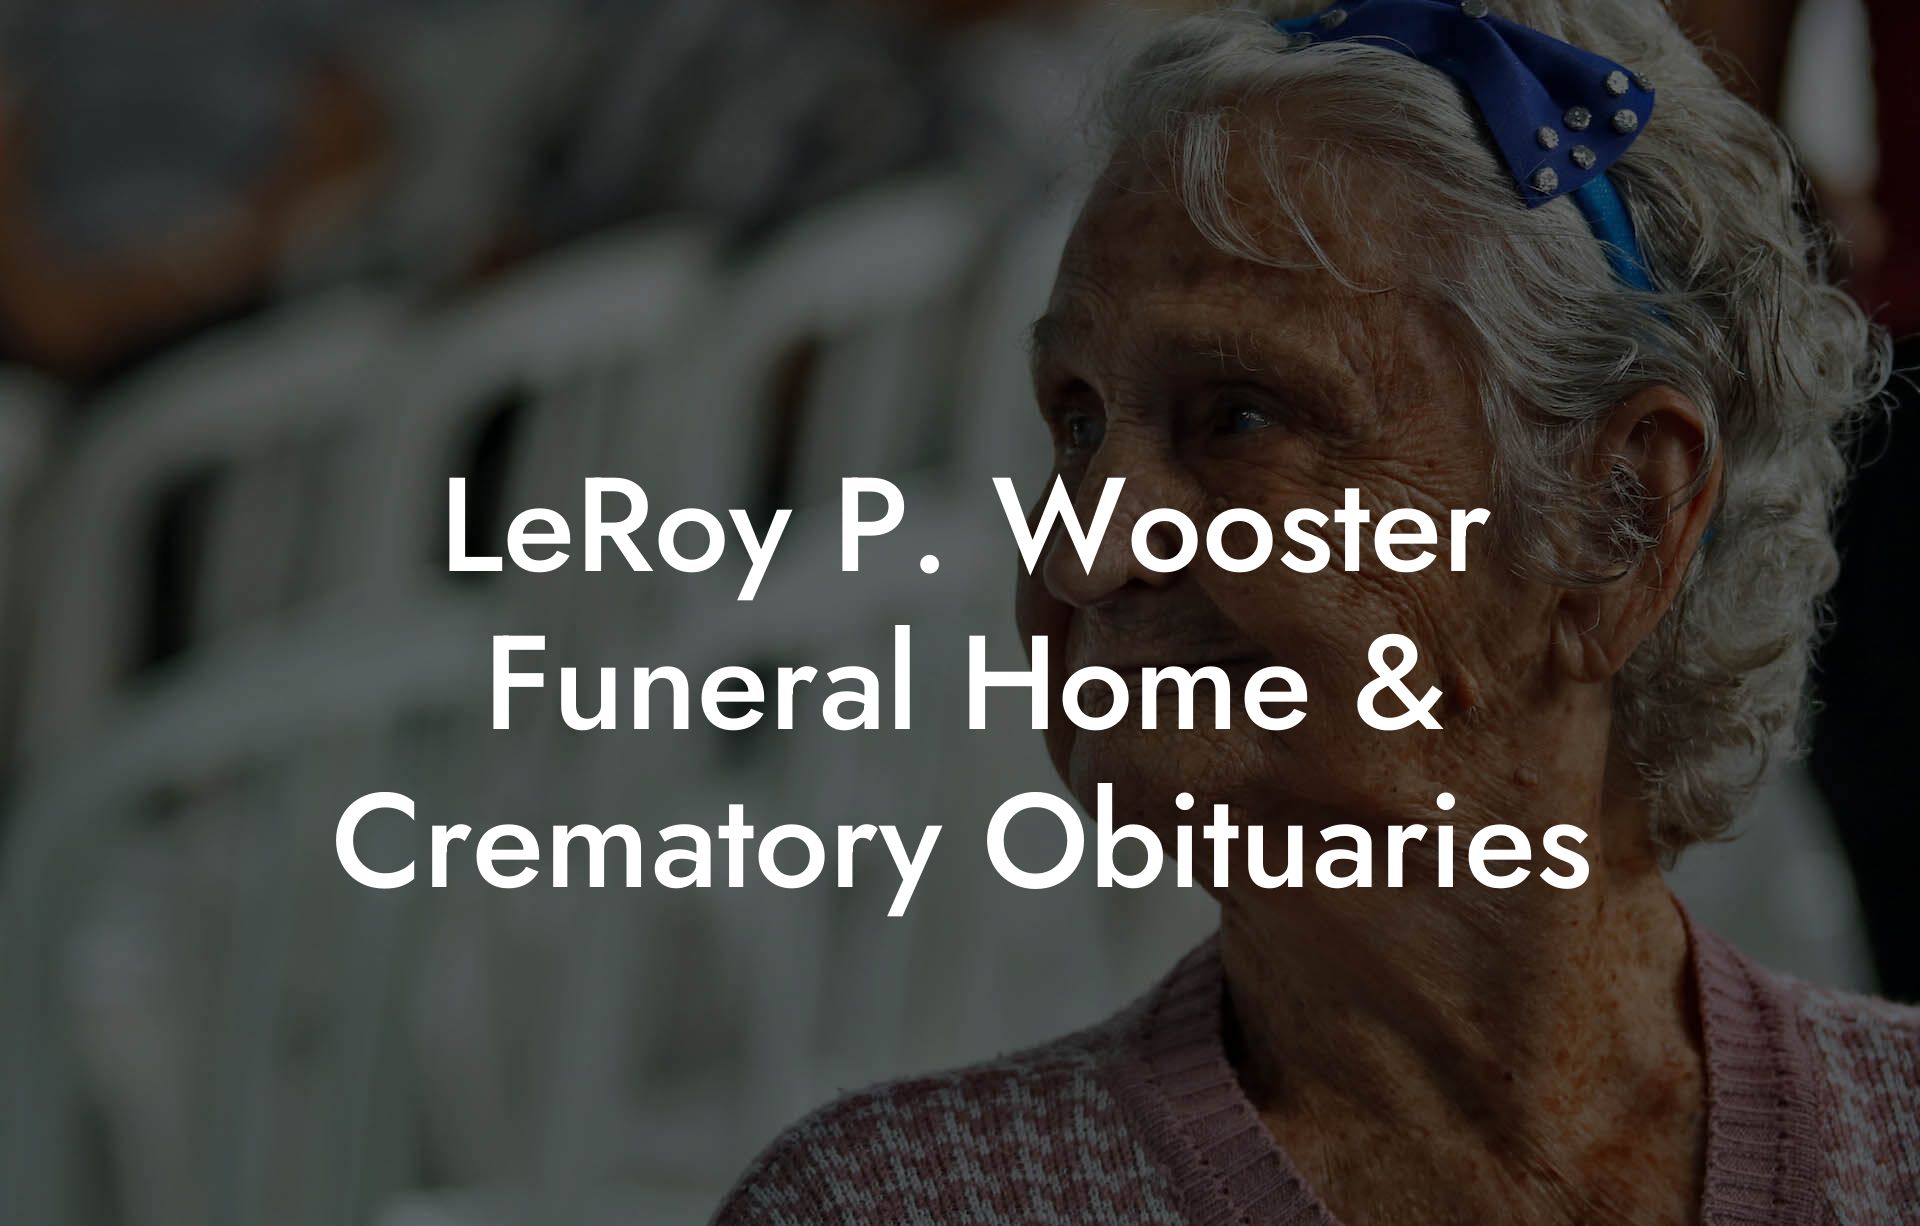 LeRoy P. Wooster Funeral Home & Crematory Obituaries